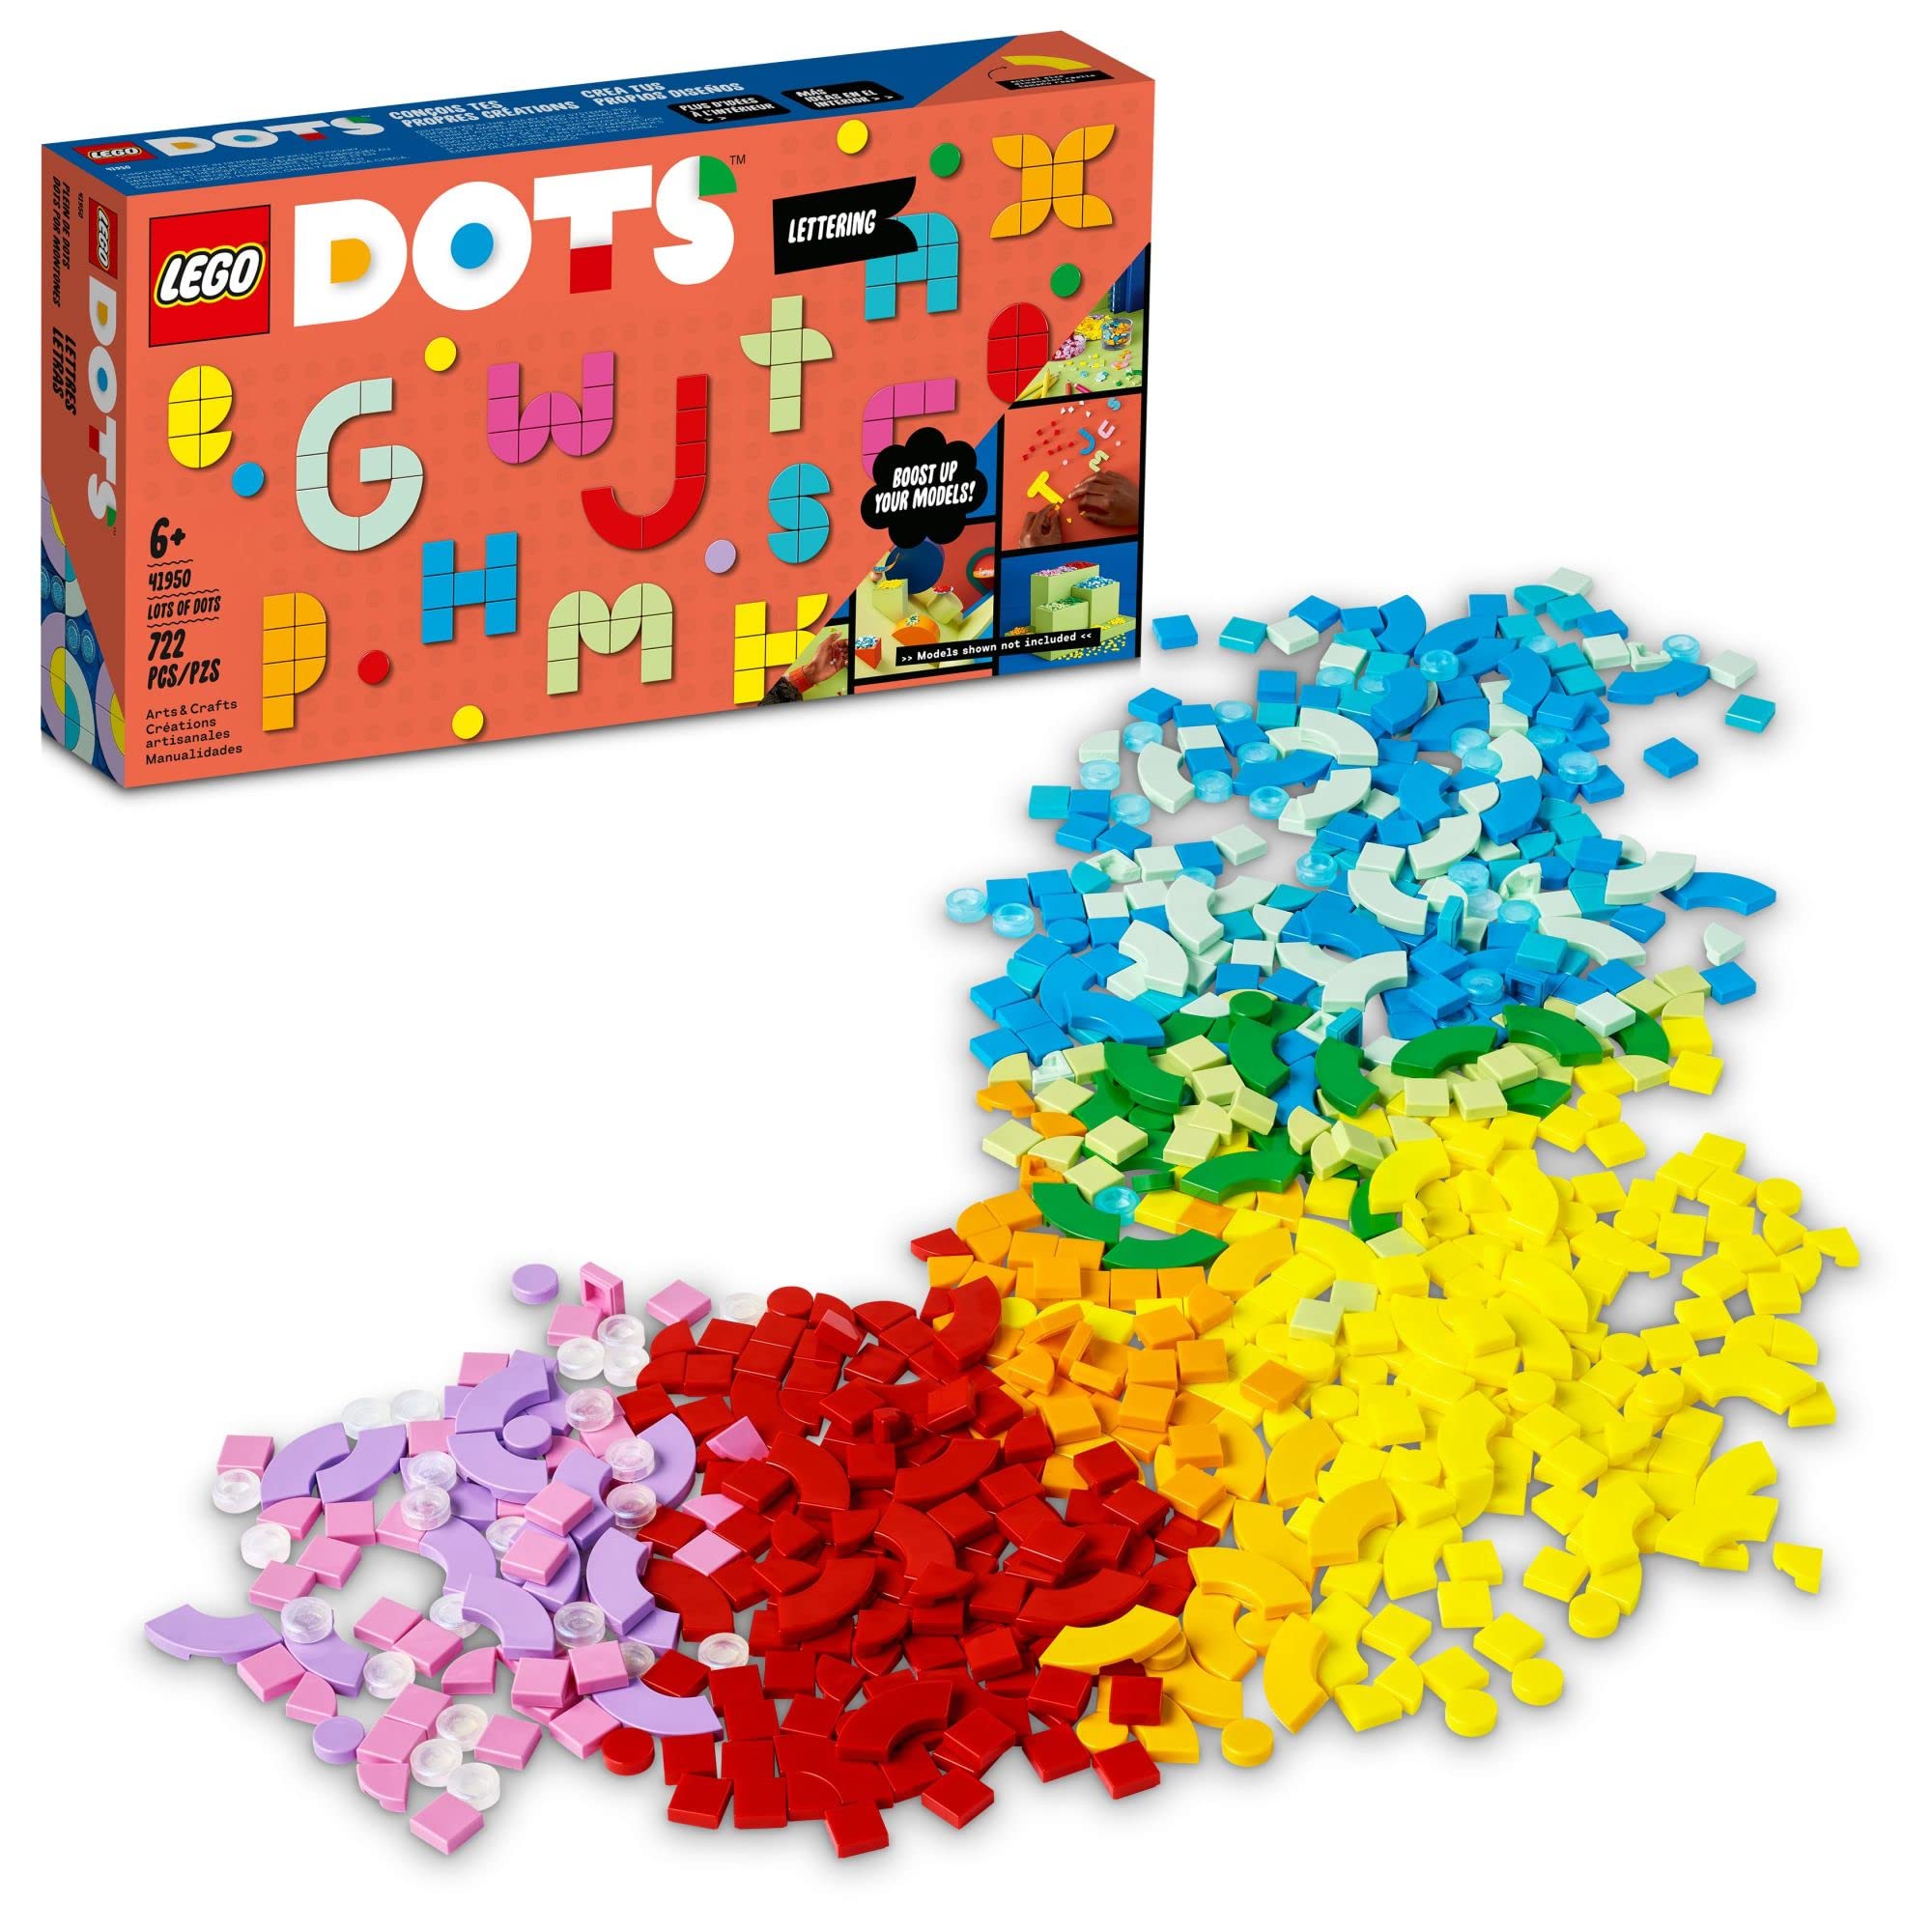 Mua LEGO DOTS Lots of DOTS Lettering Tiles 41950 Ultimate ...